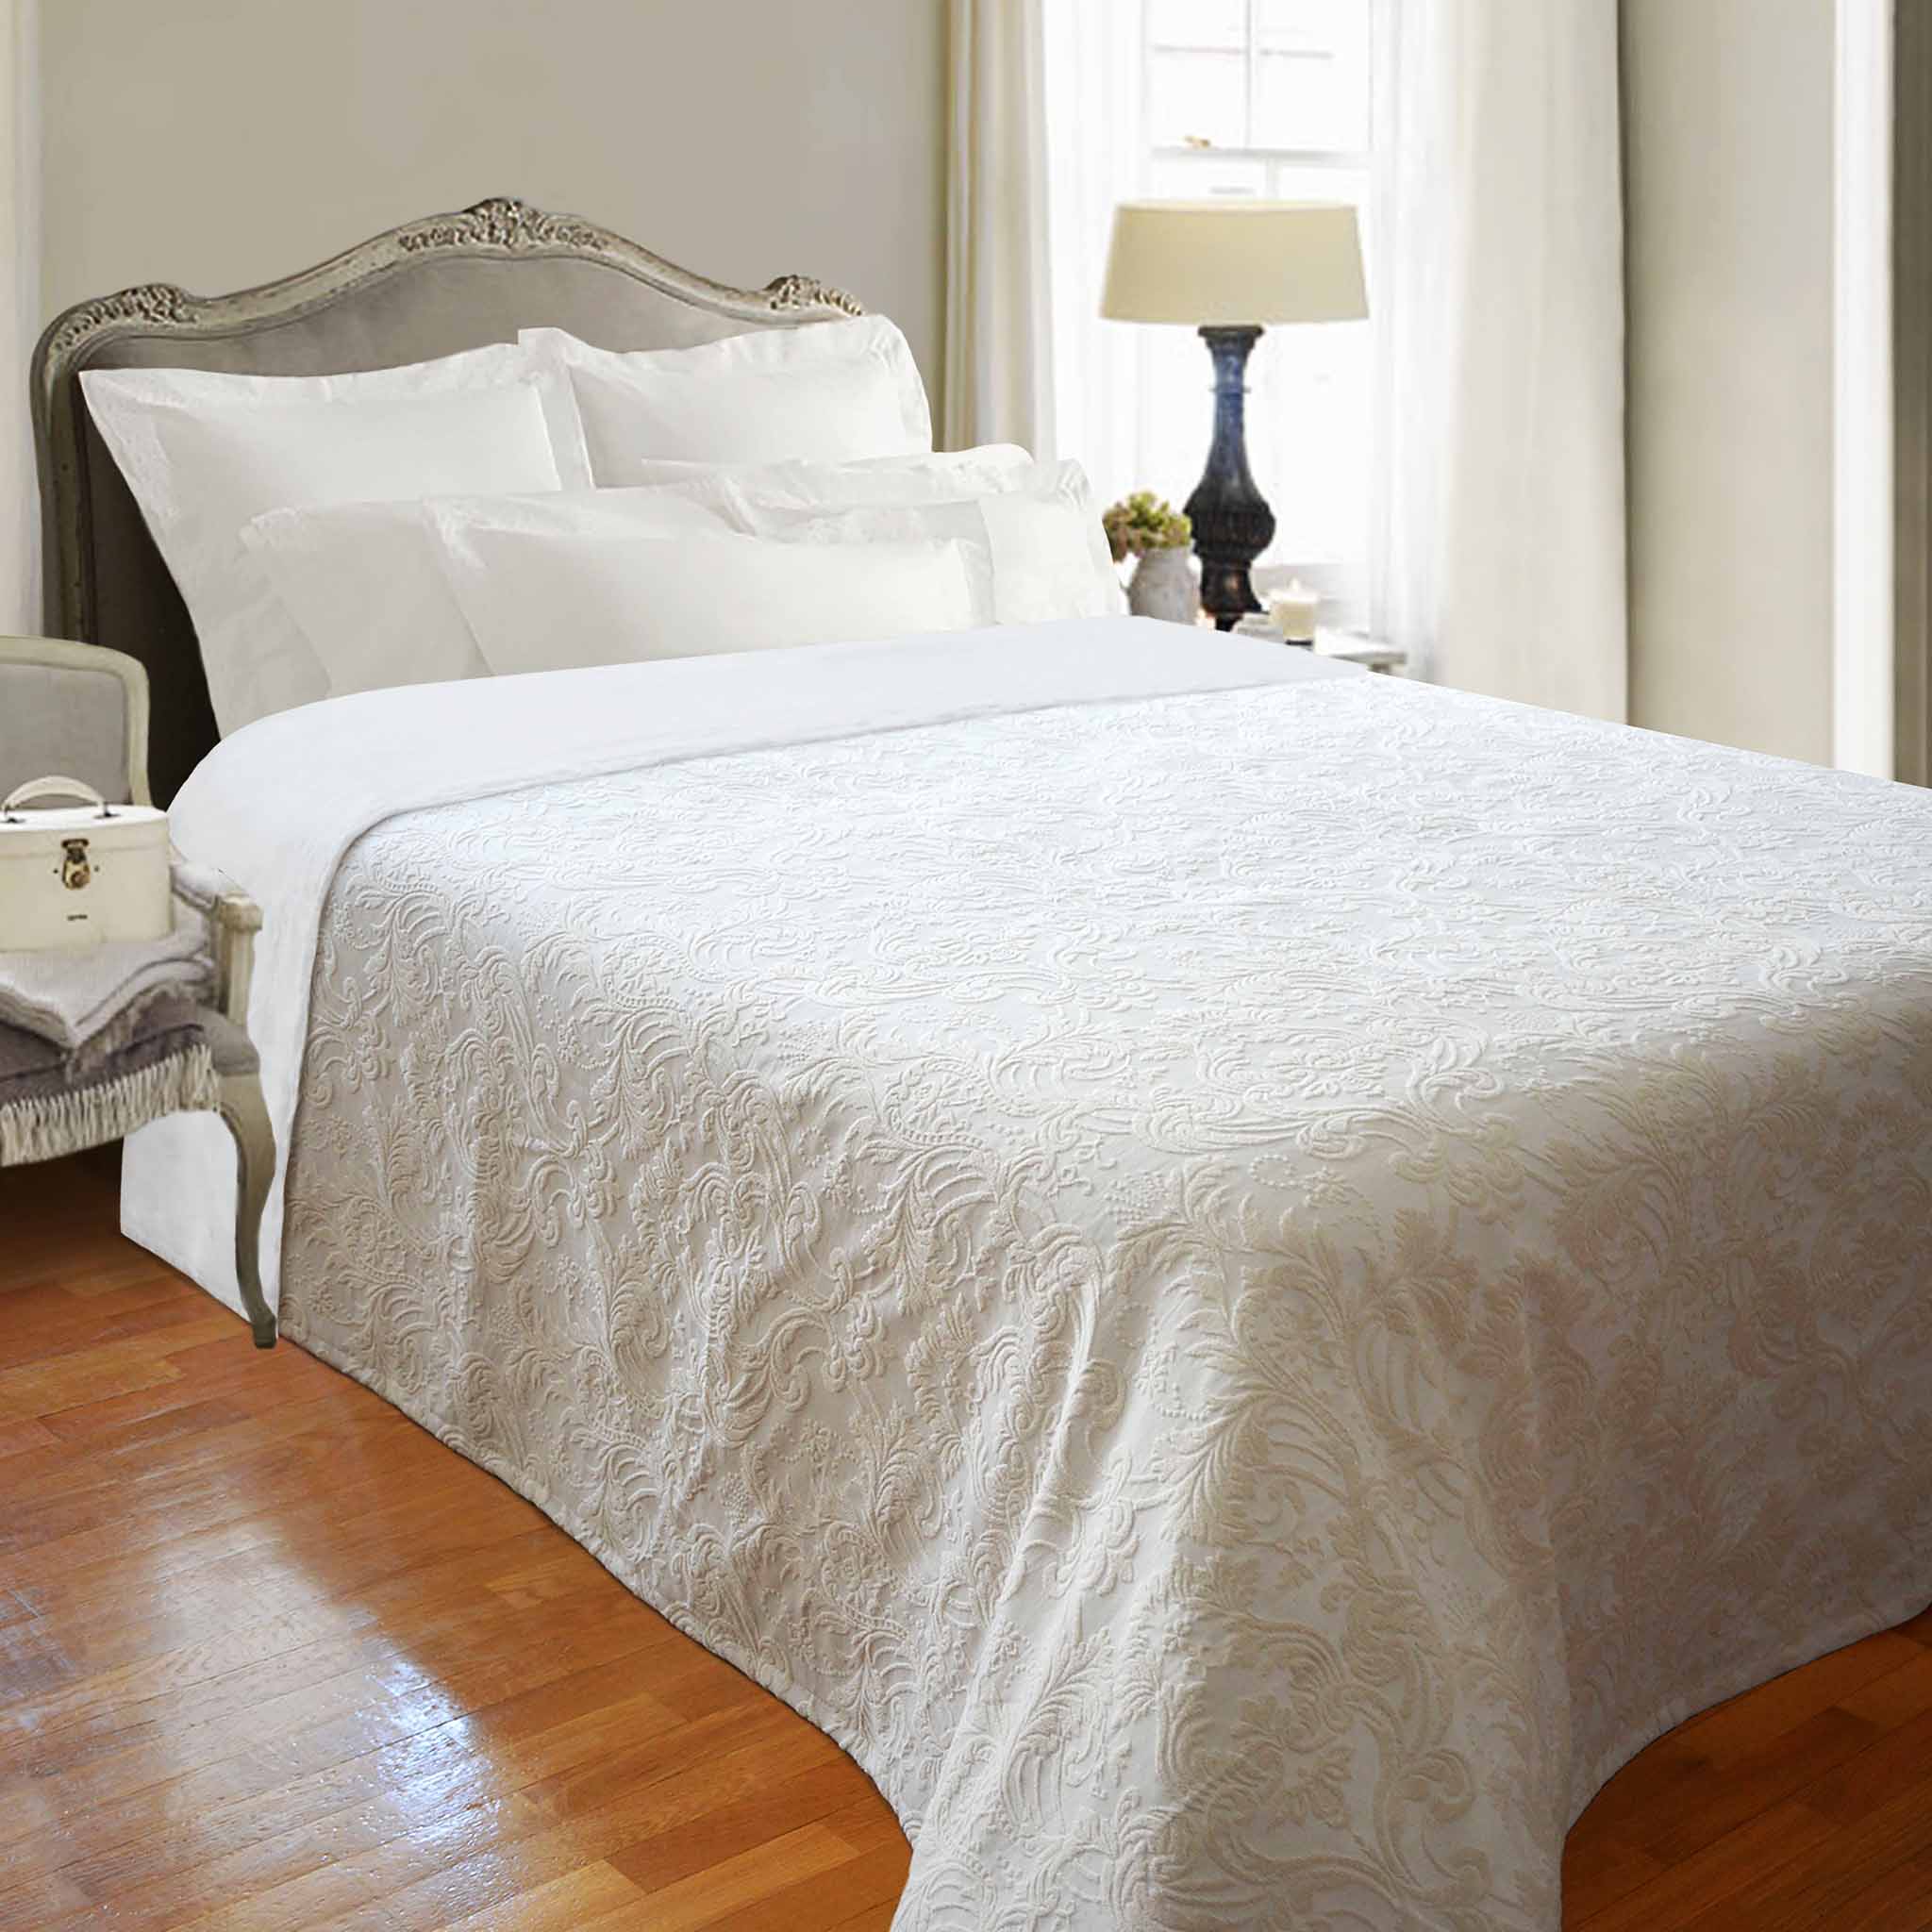 Our line of richly textured luxury woven Jacquard bedspreads adds a simple but elegant look to your bed. These Jacquard bedspreads are lightweight, comfortable, and machine washable (a must for allergy sufferers). 